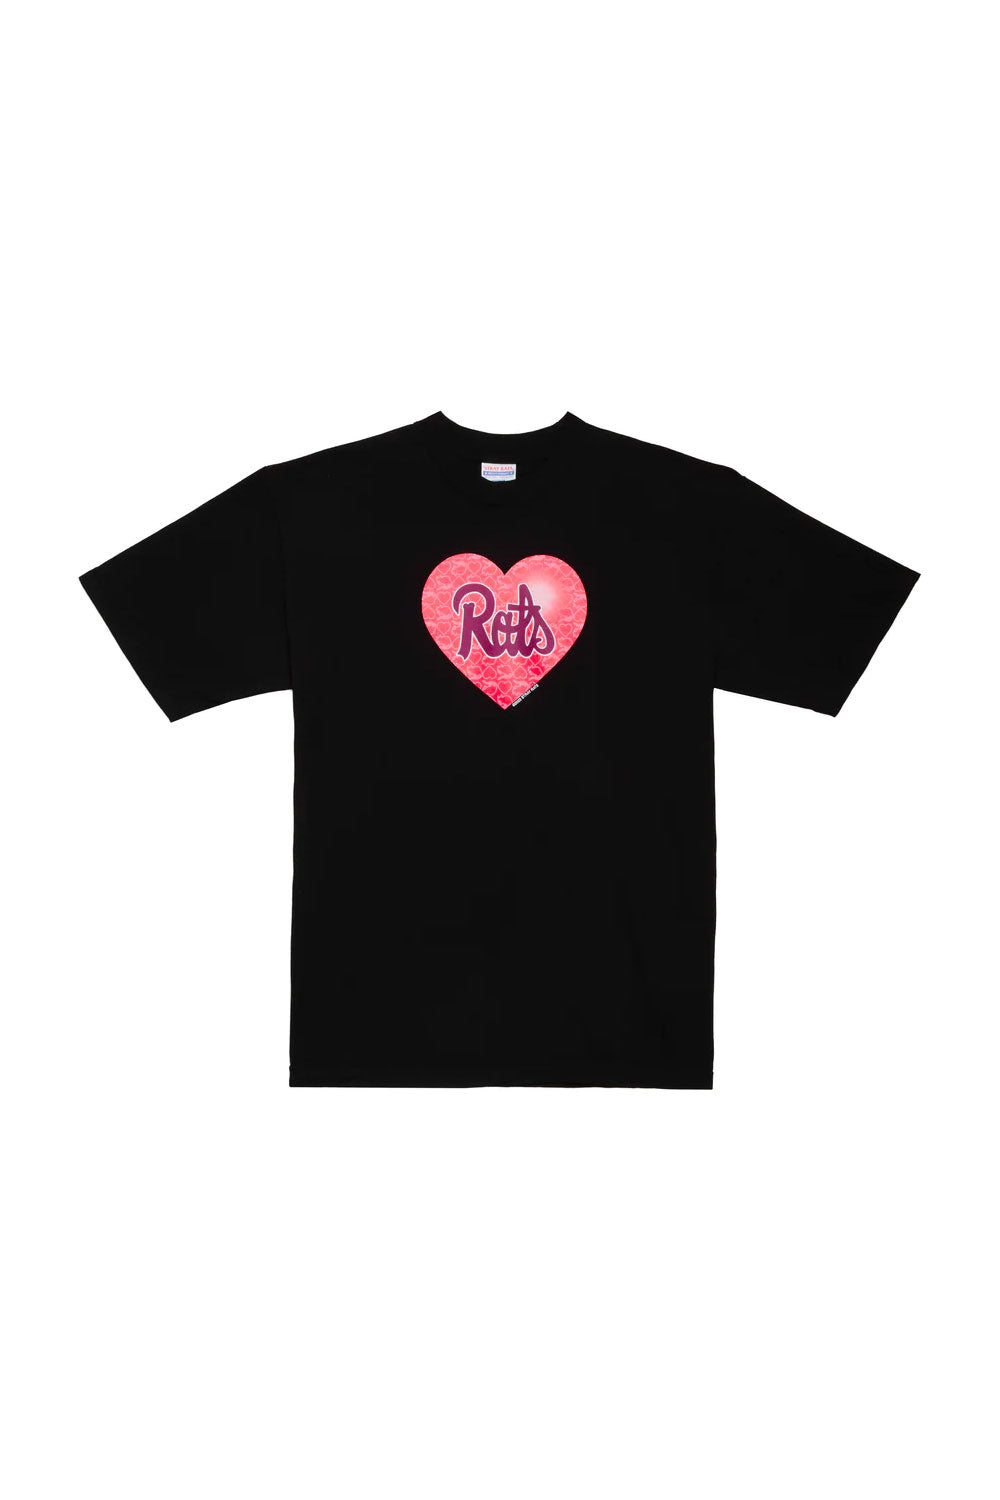 The STRAY RATS - RAT HEART TEE BLACK available online with global shipping, and in PAM Stores Melbourne and Sydney.